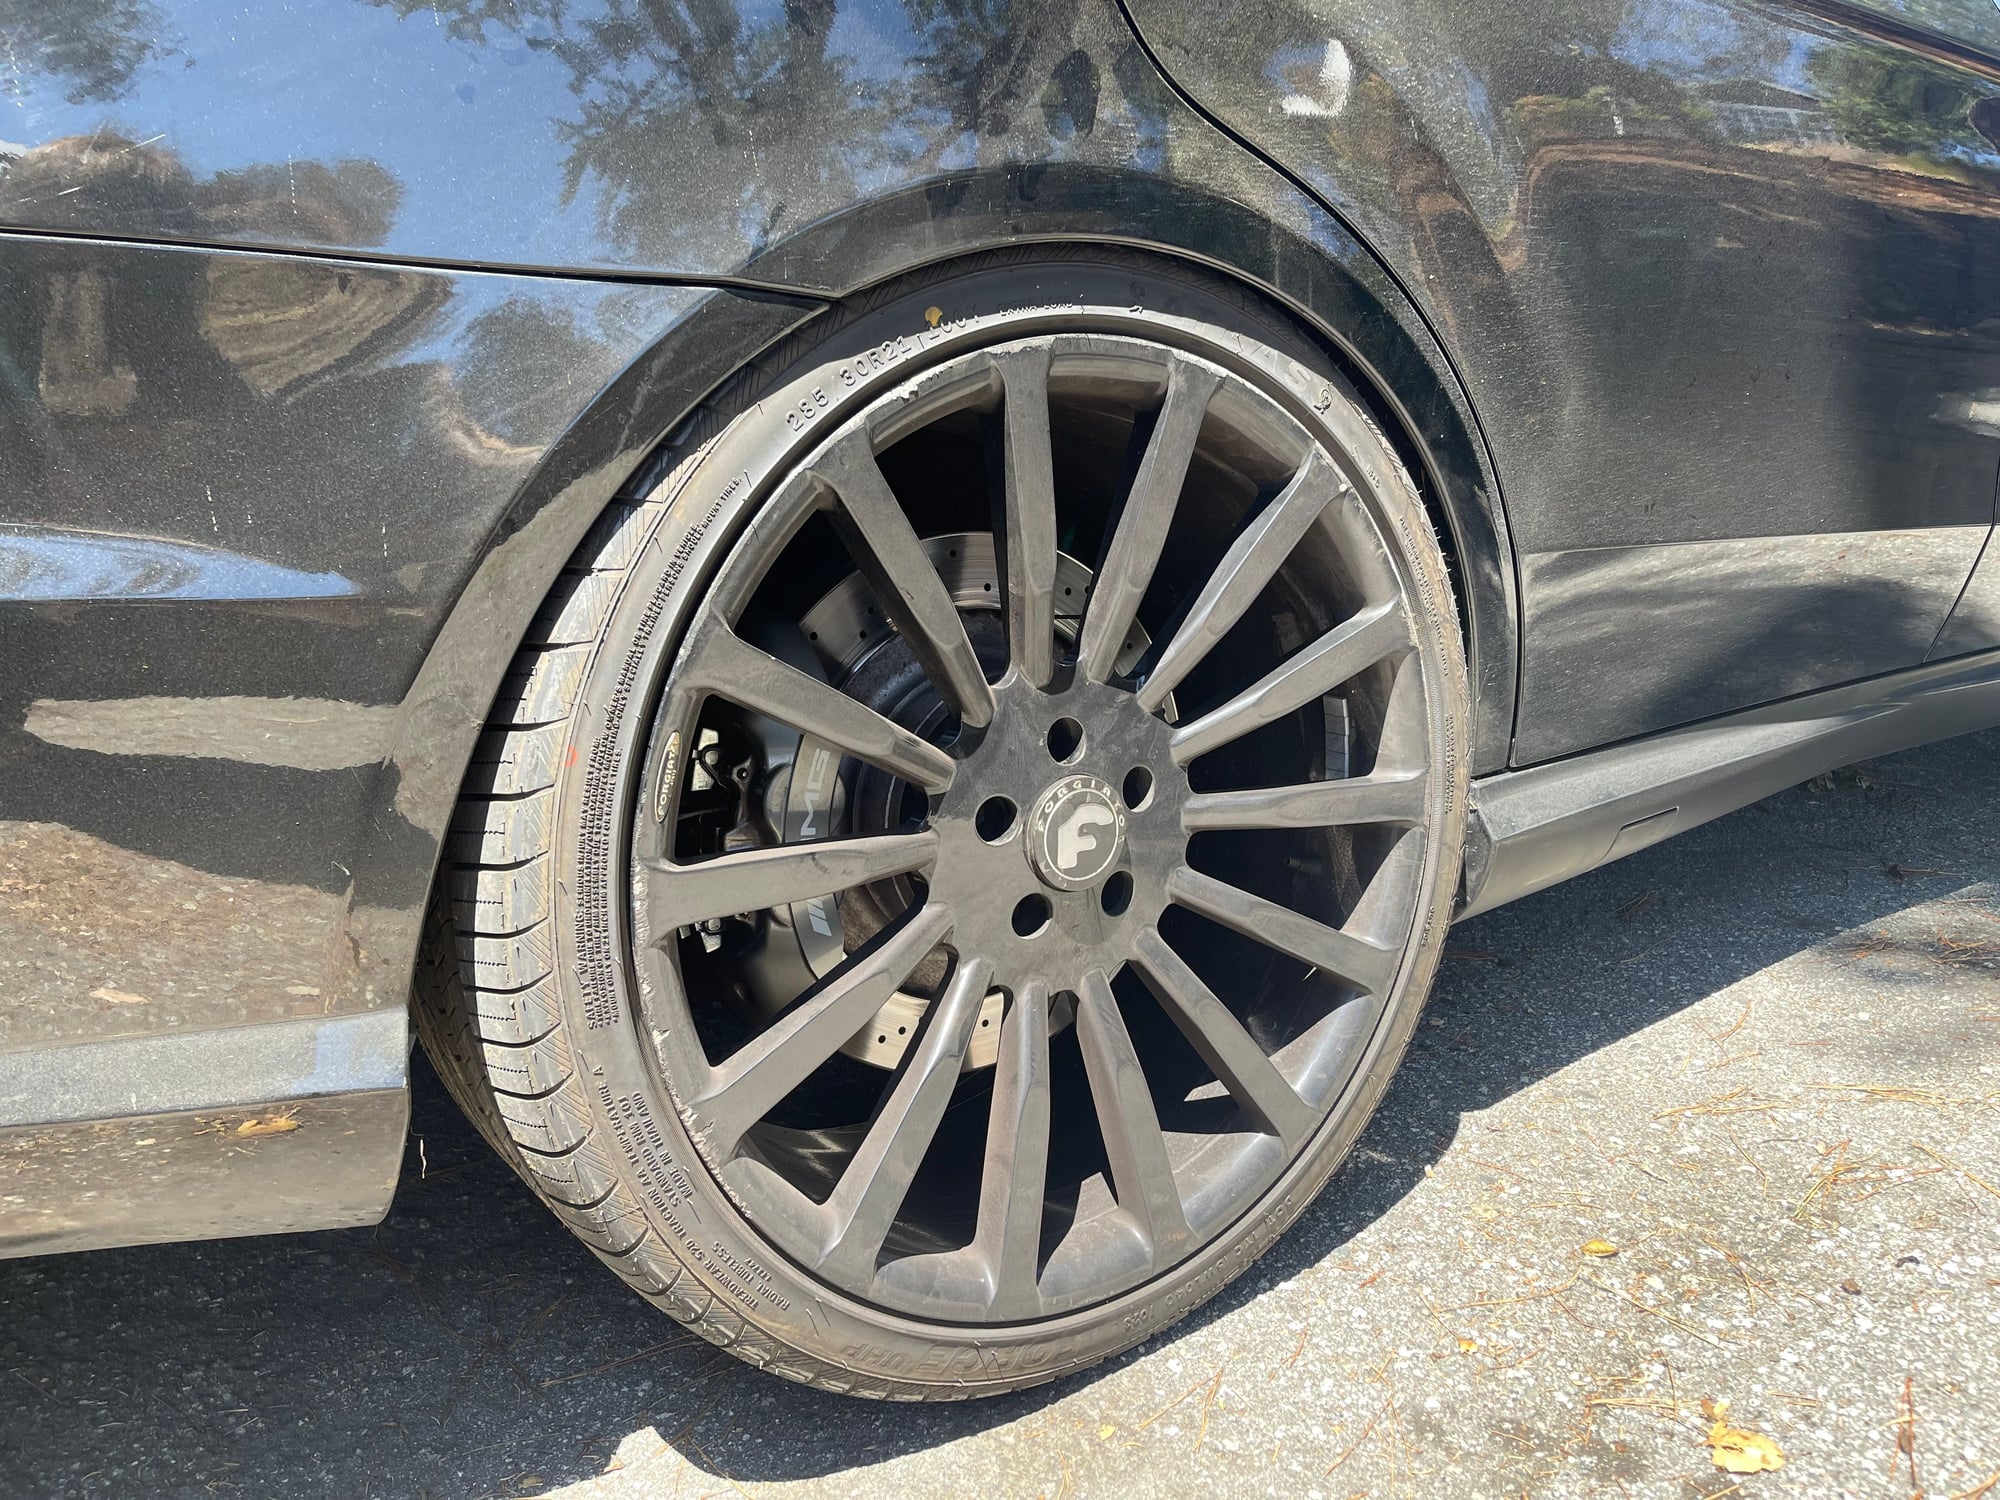 Wheels and Tires/Axles - Forgiato Wheel and Tires; 21 Inch, 5x112 Pattern Mercedes - Used - 1993 to 2023 Mercedes-Benz E-Class - 1993 to 2023 Mercedes-Benz C-Class - 2004 to 2014 Mercedes-Benz CLS-Class - Carmel Valley, CA 93924, United States